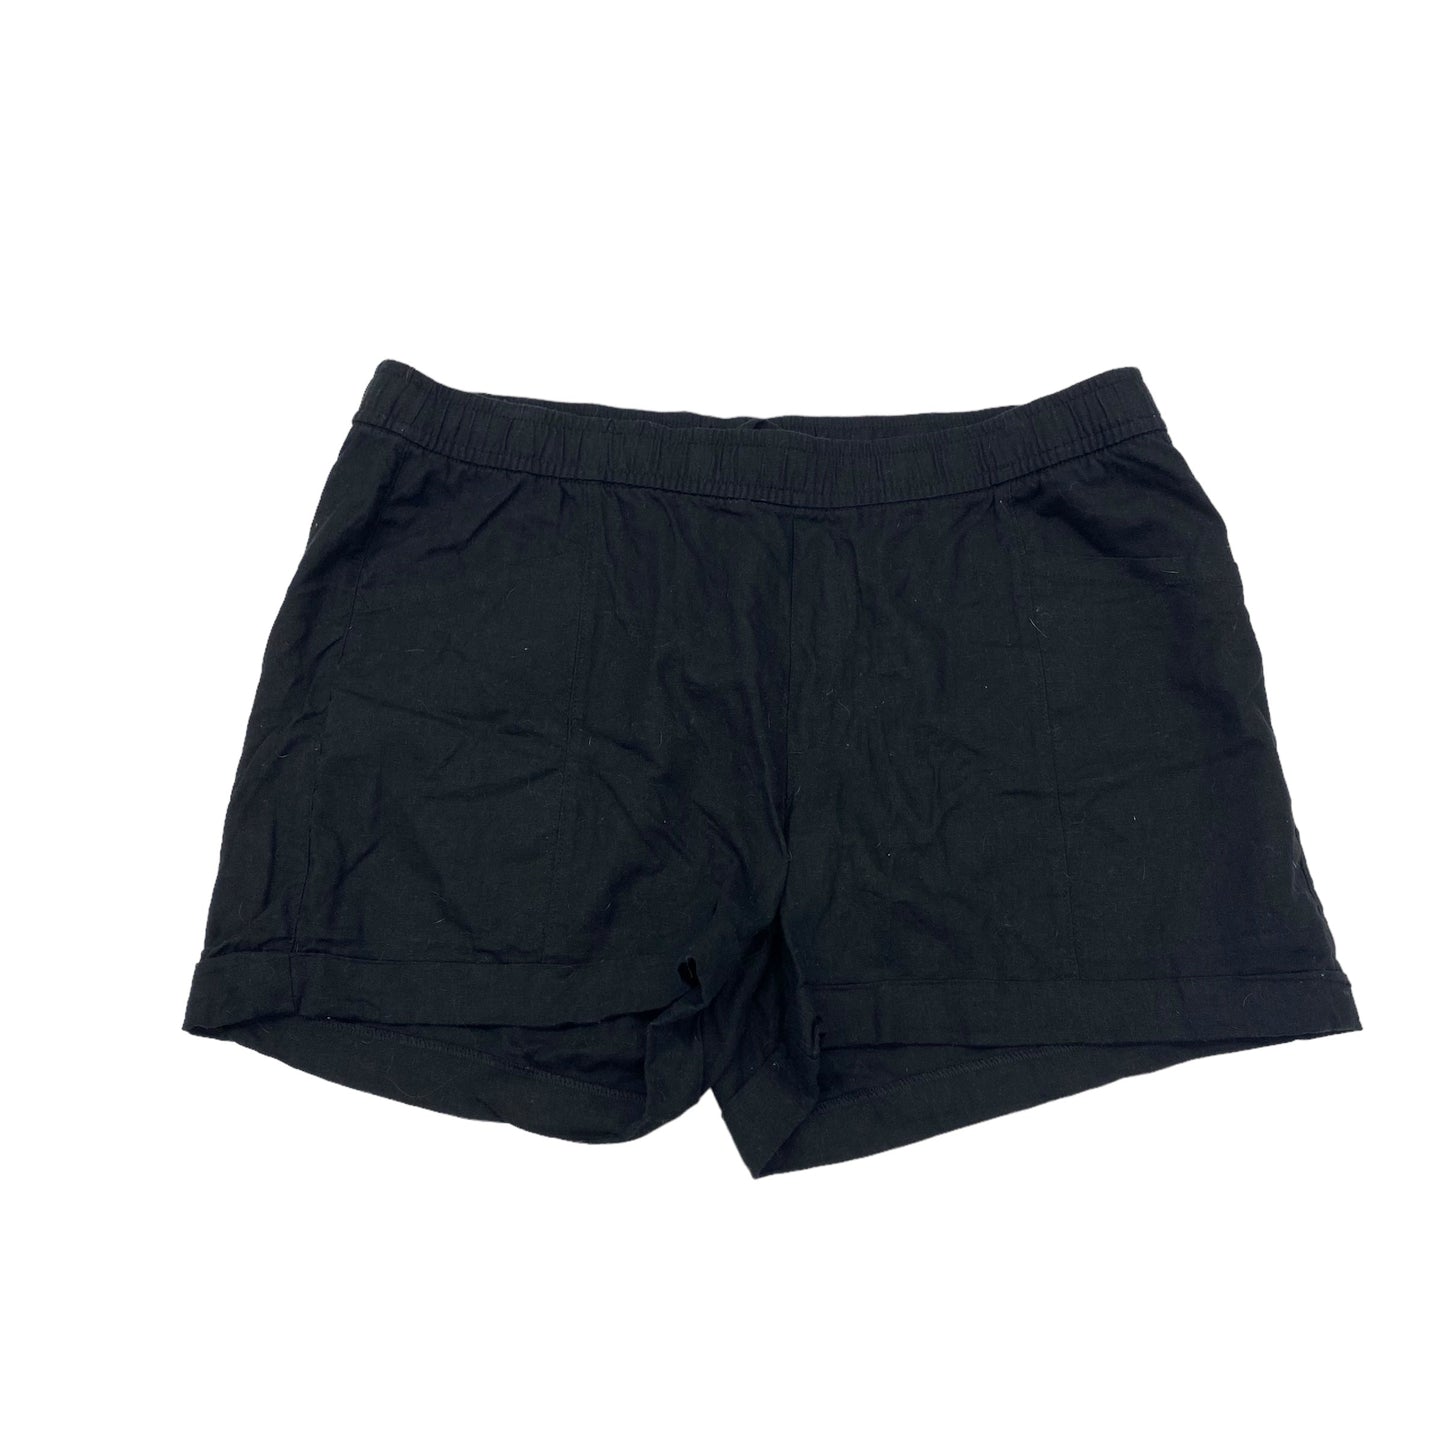 BLACK SHORTS by OLD NAVY Size:XL